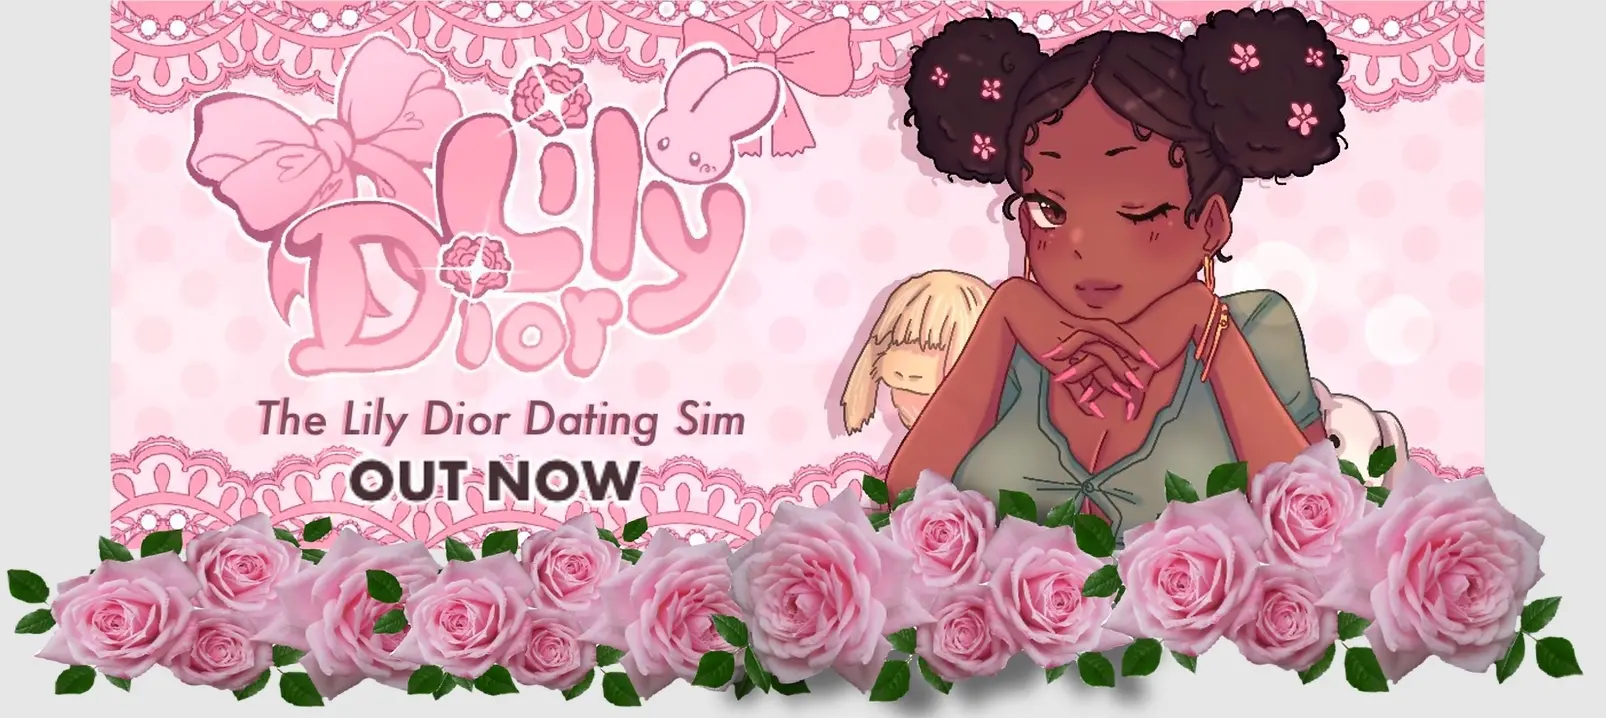 The Lily Dior Dating Sim main image